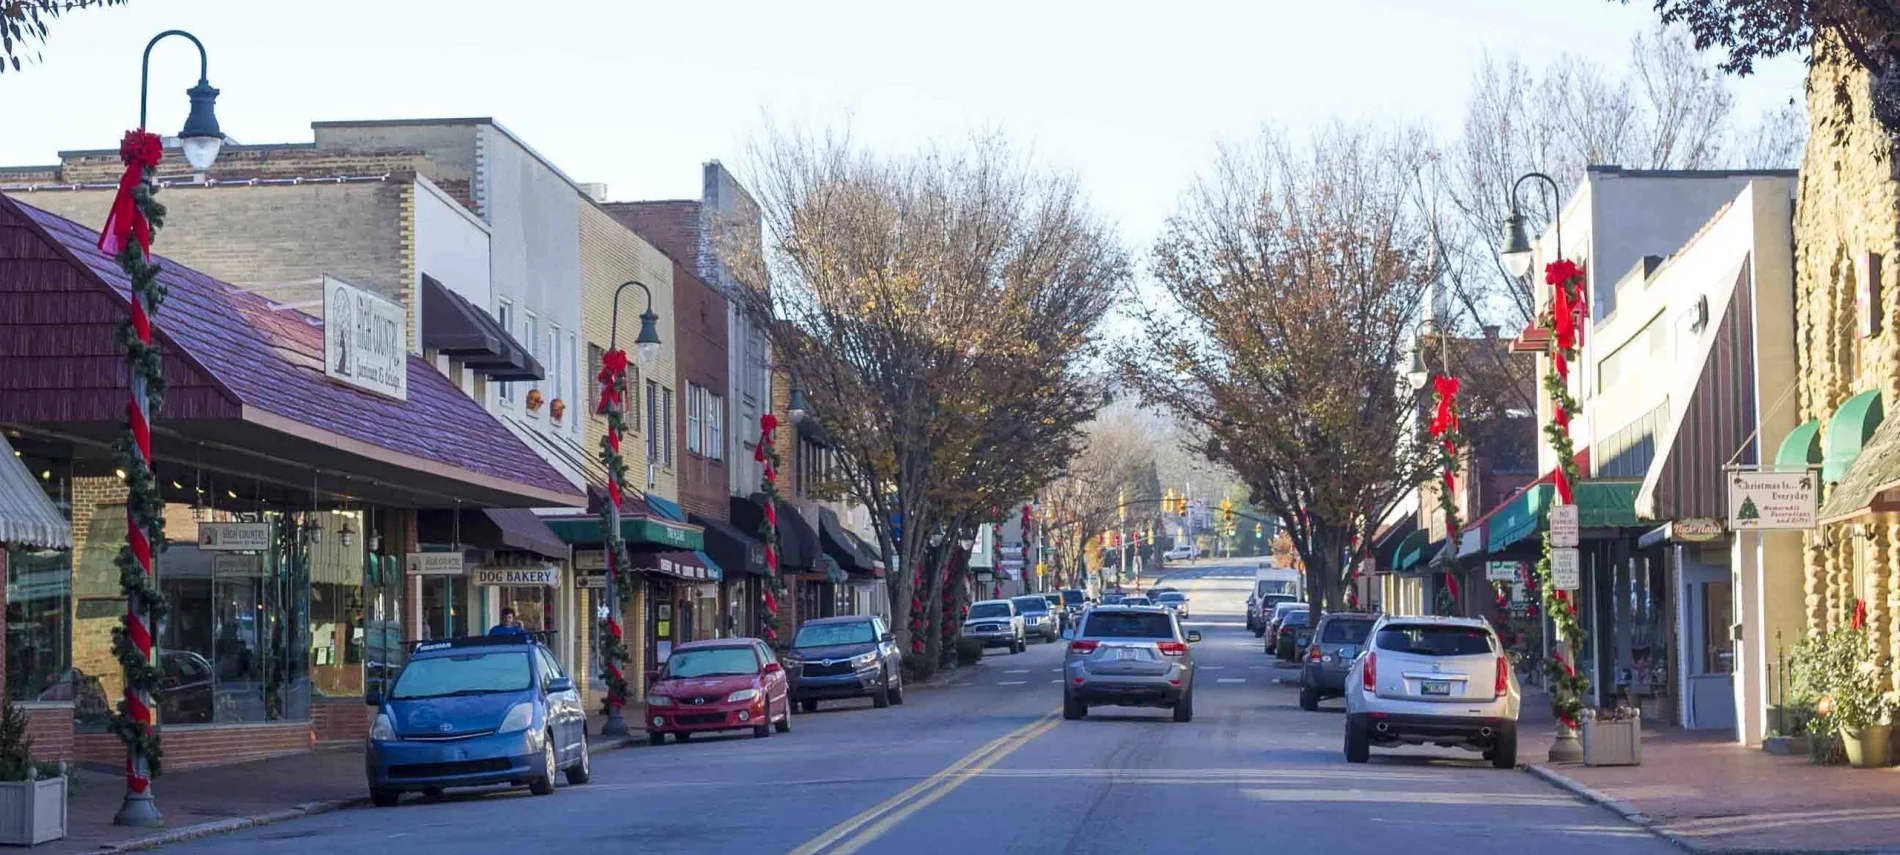 downtown waynesville in the morning